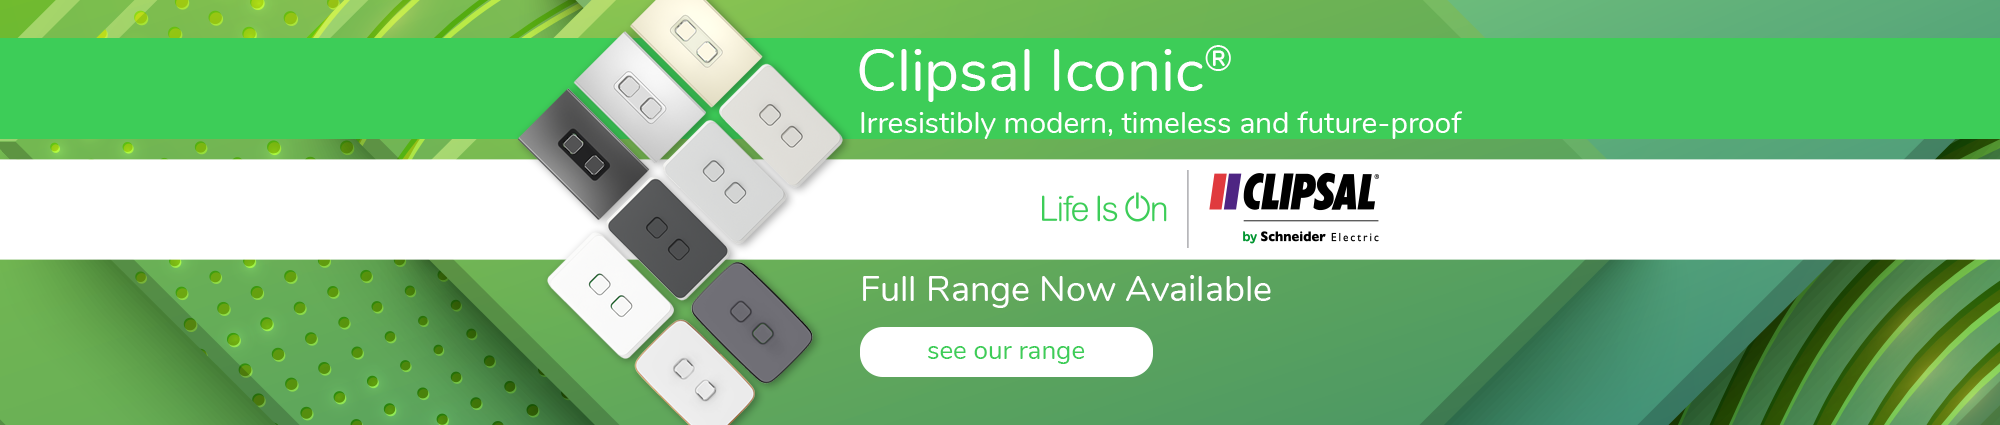 Home Page Banner - Clipsal Iconic